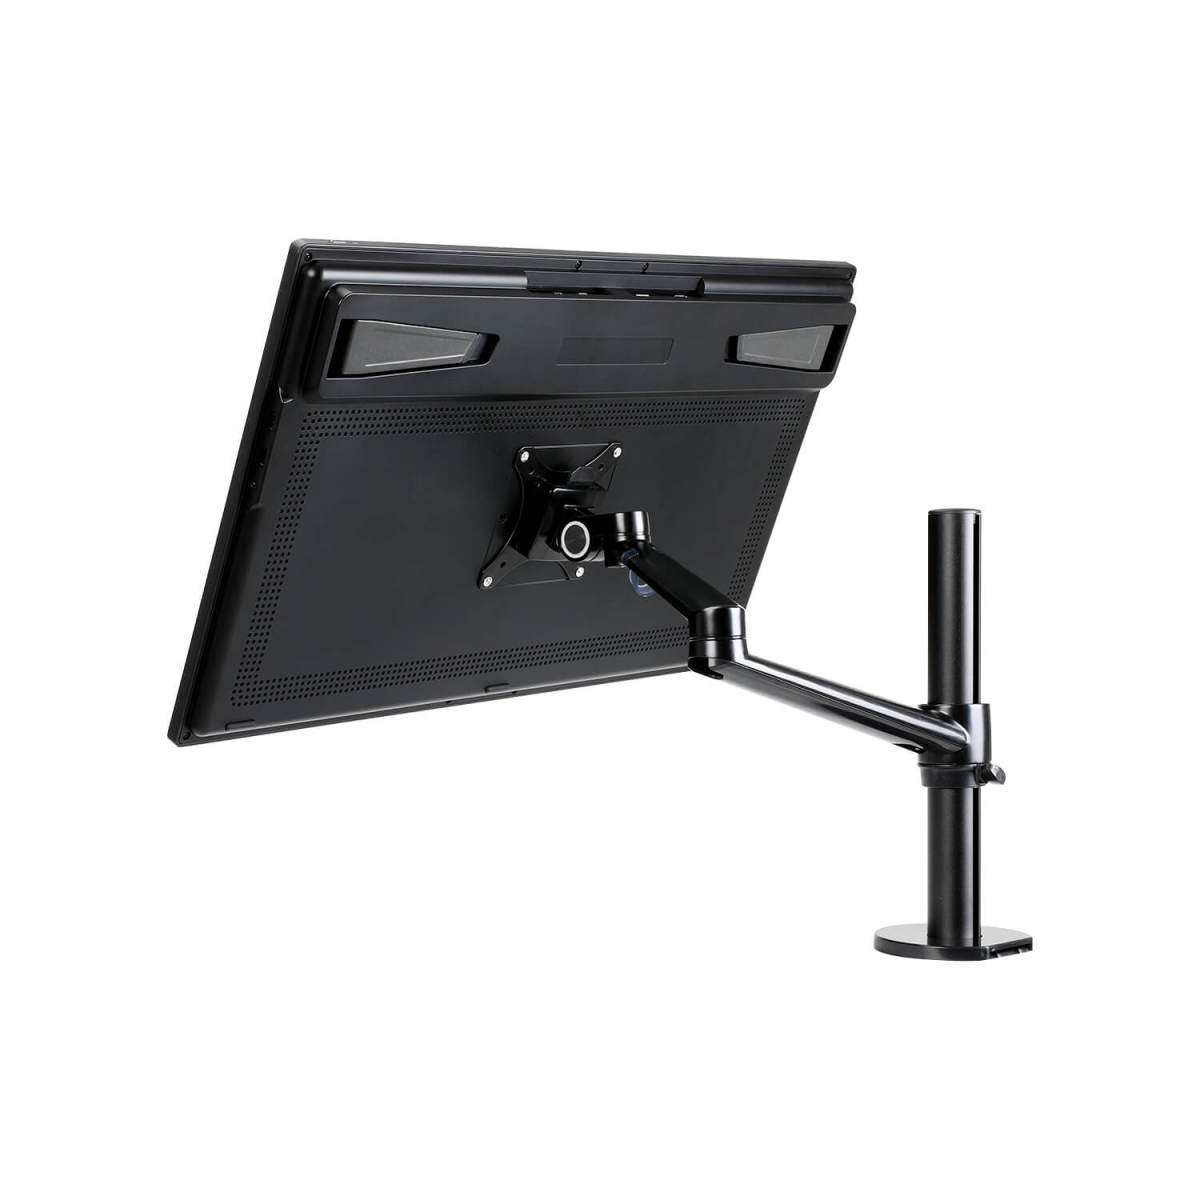 Middel residu Schrijf op Huion Single Monitor Arm ST410 | Huion Official Store: Drawing Tablets, Pen  Tablets, Pen Display, Led Light Pad